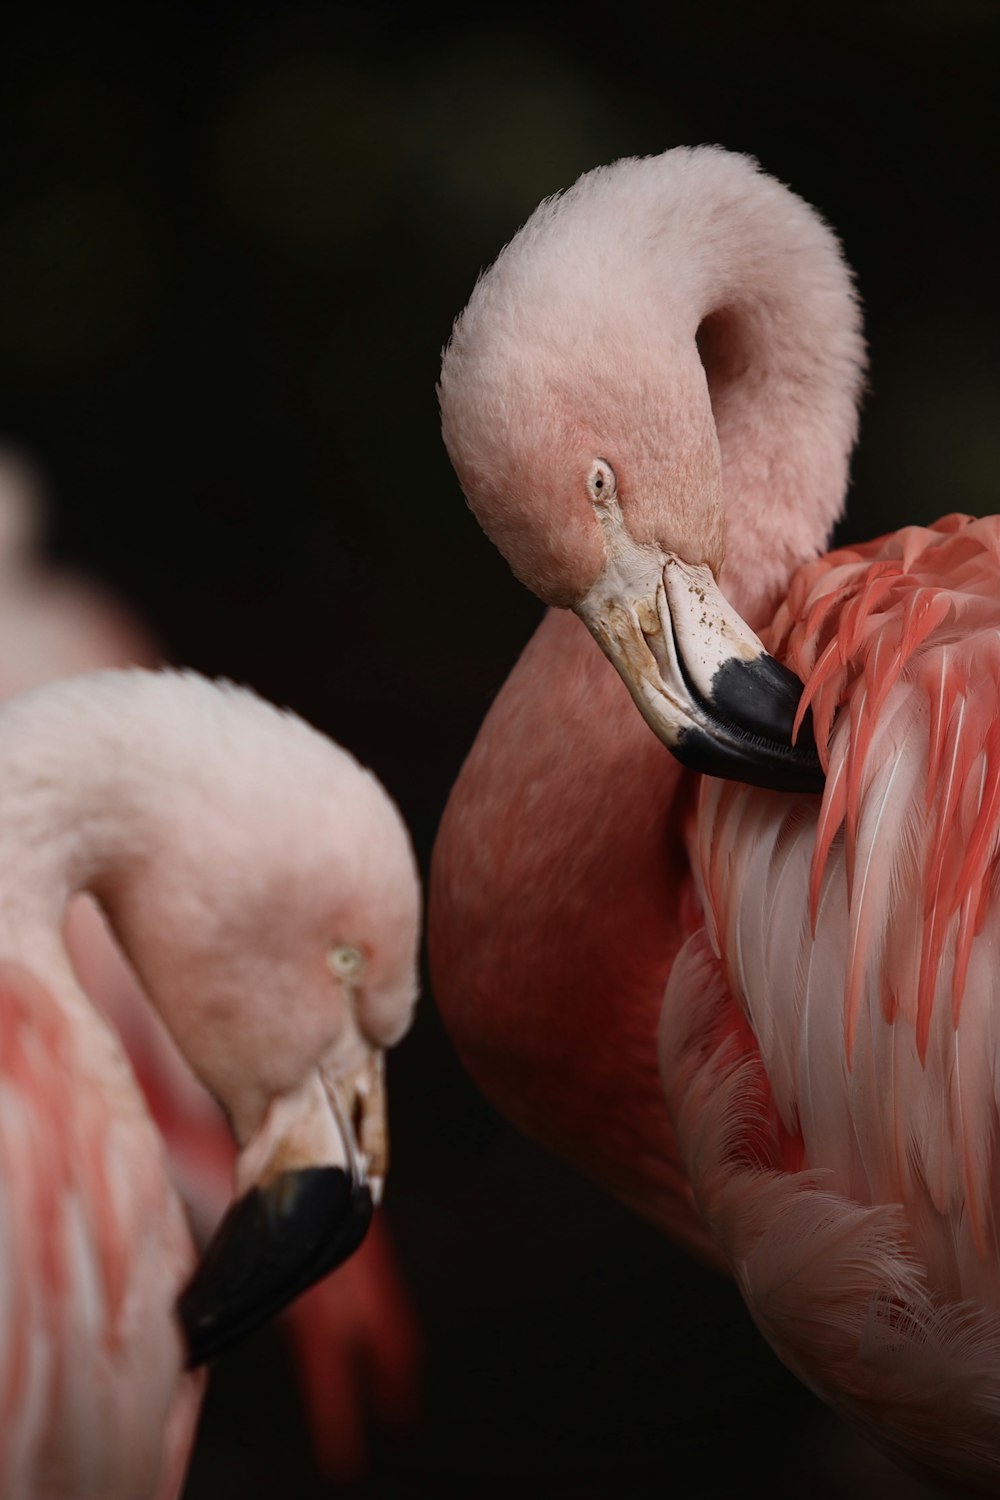 two pink flamingos standing next to each other